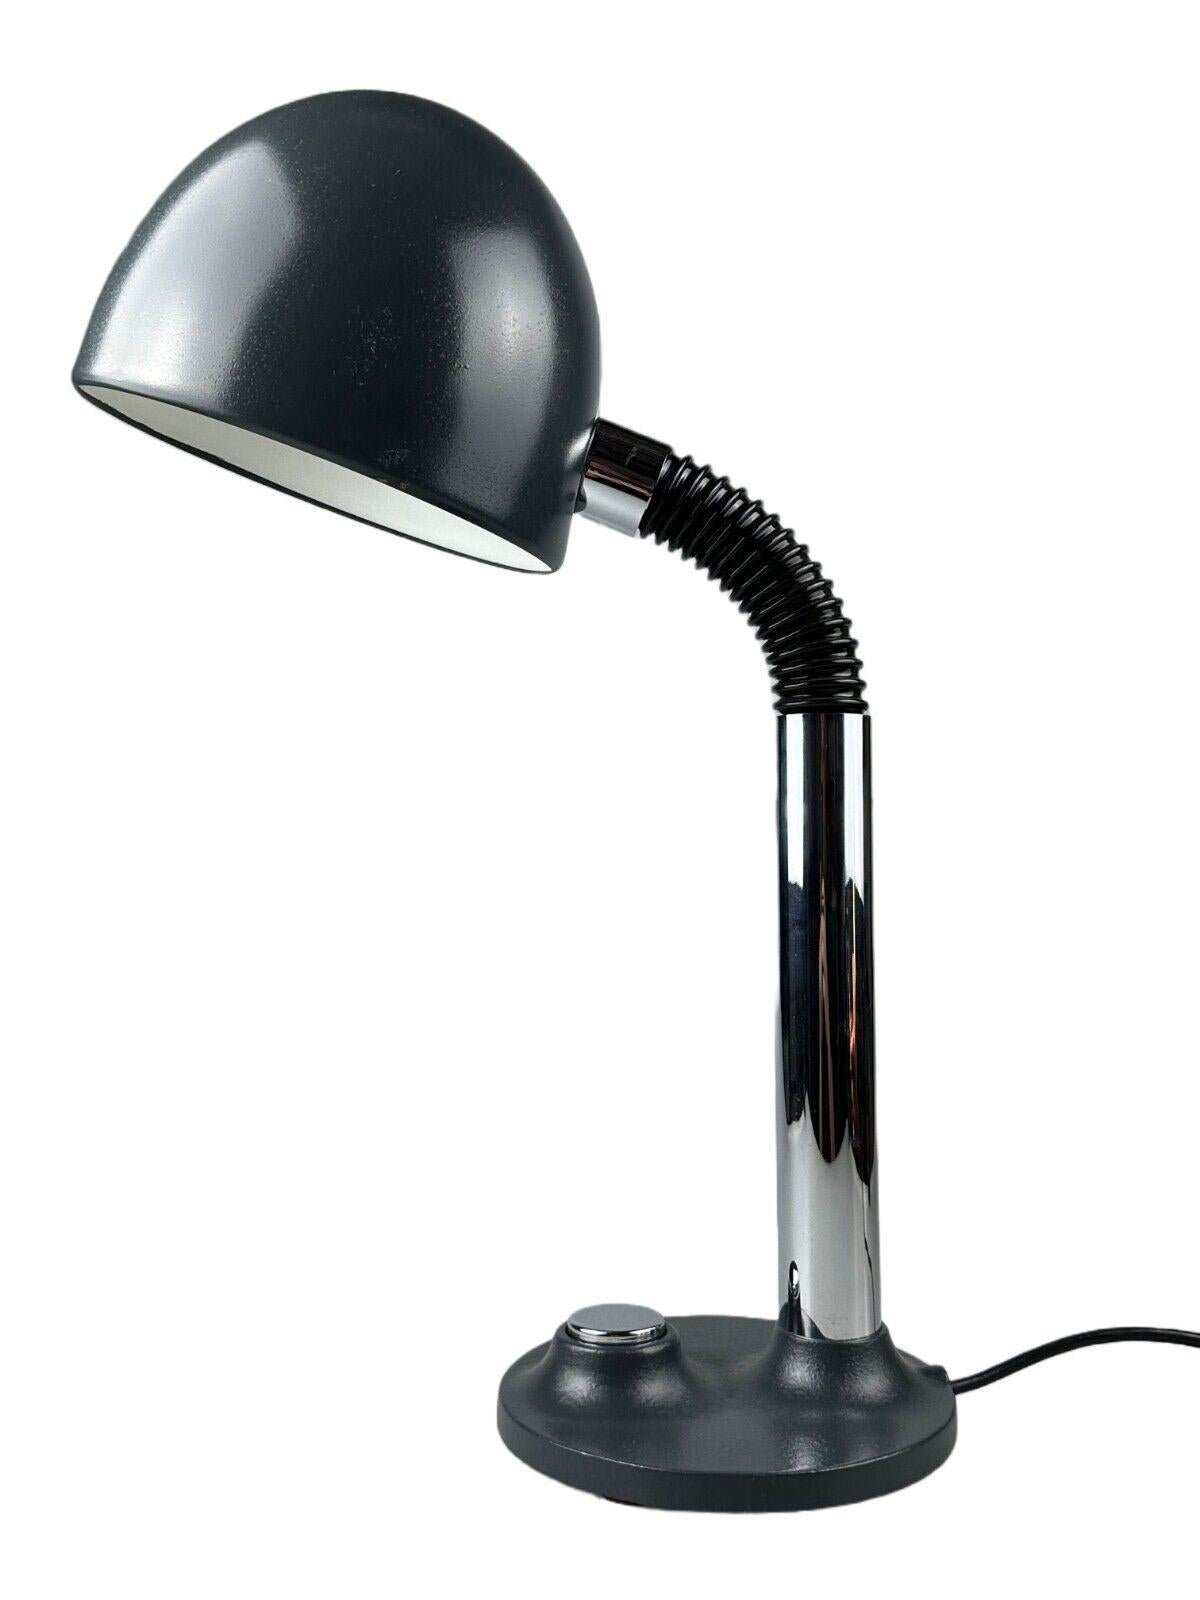 60s 70s table lamp Egon Hillebrand ball lamp space age metal design

Object: table lamp

Manufacturer: Hillebrand

Condition: good

Age: around 1960-1970

Material: metal, plastic

Dimensions:

Width = 18cm
Depth = 34cm
Height = 48cm

Other